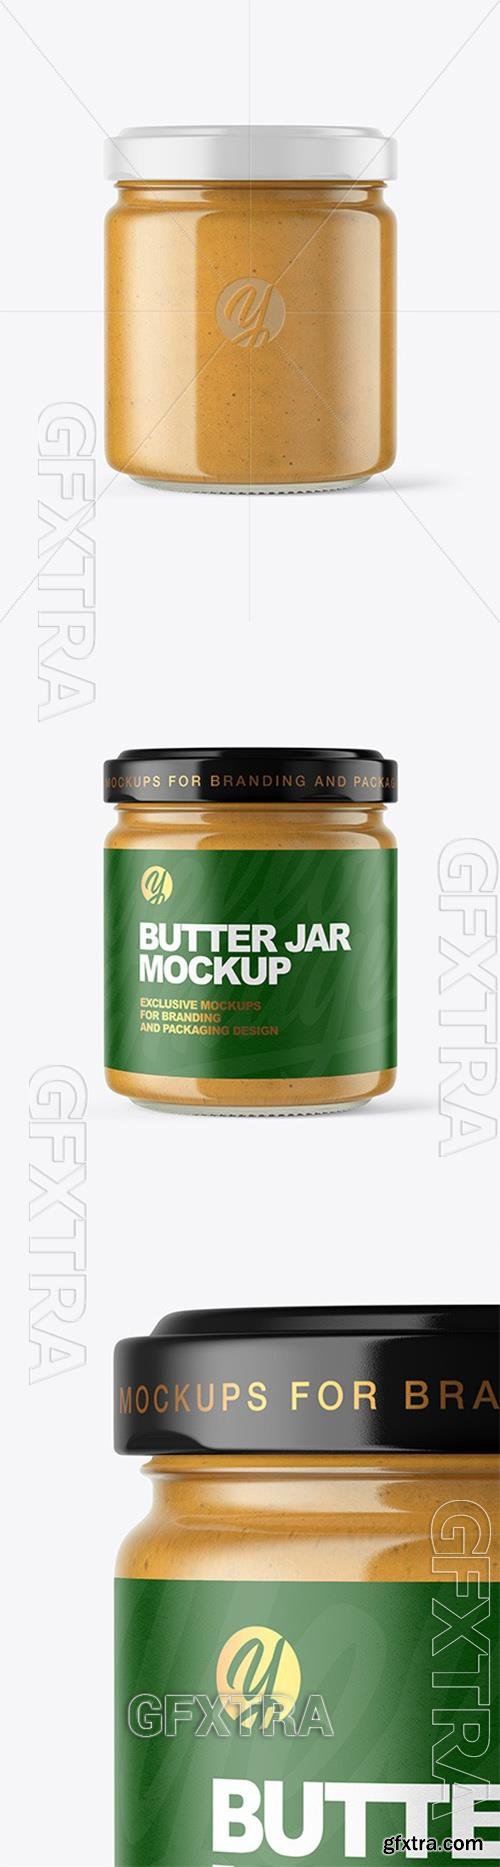 Clear Glass Jar with Peanut Butter Mockup 51335